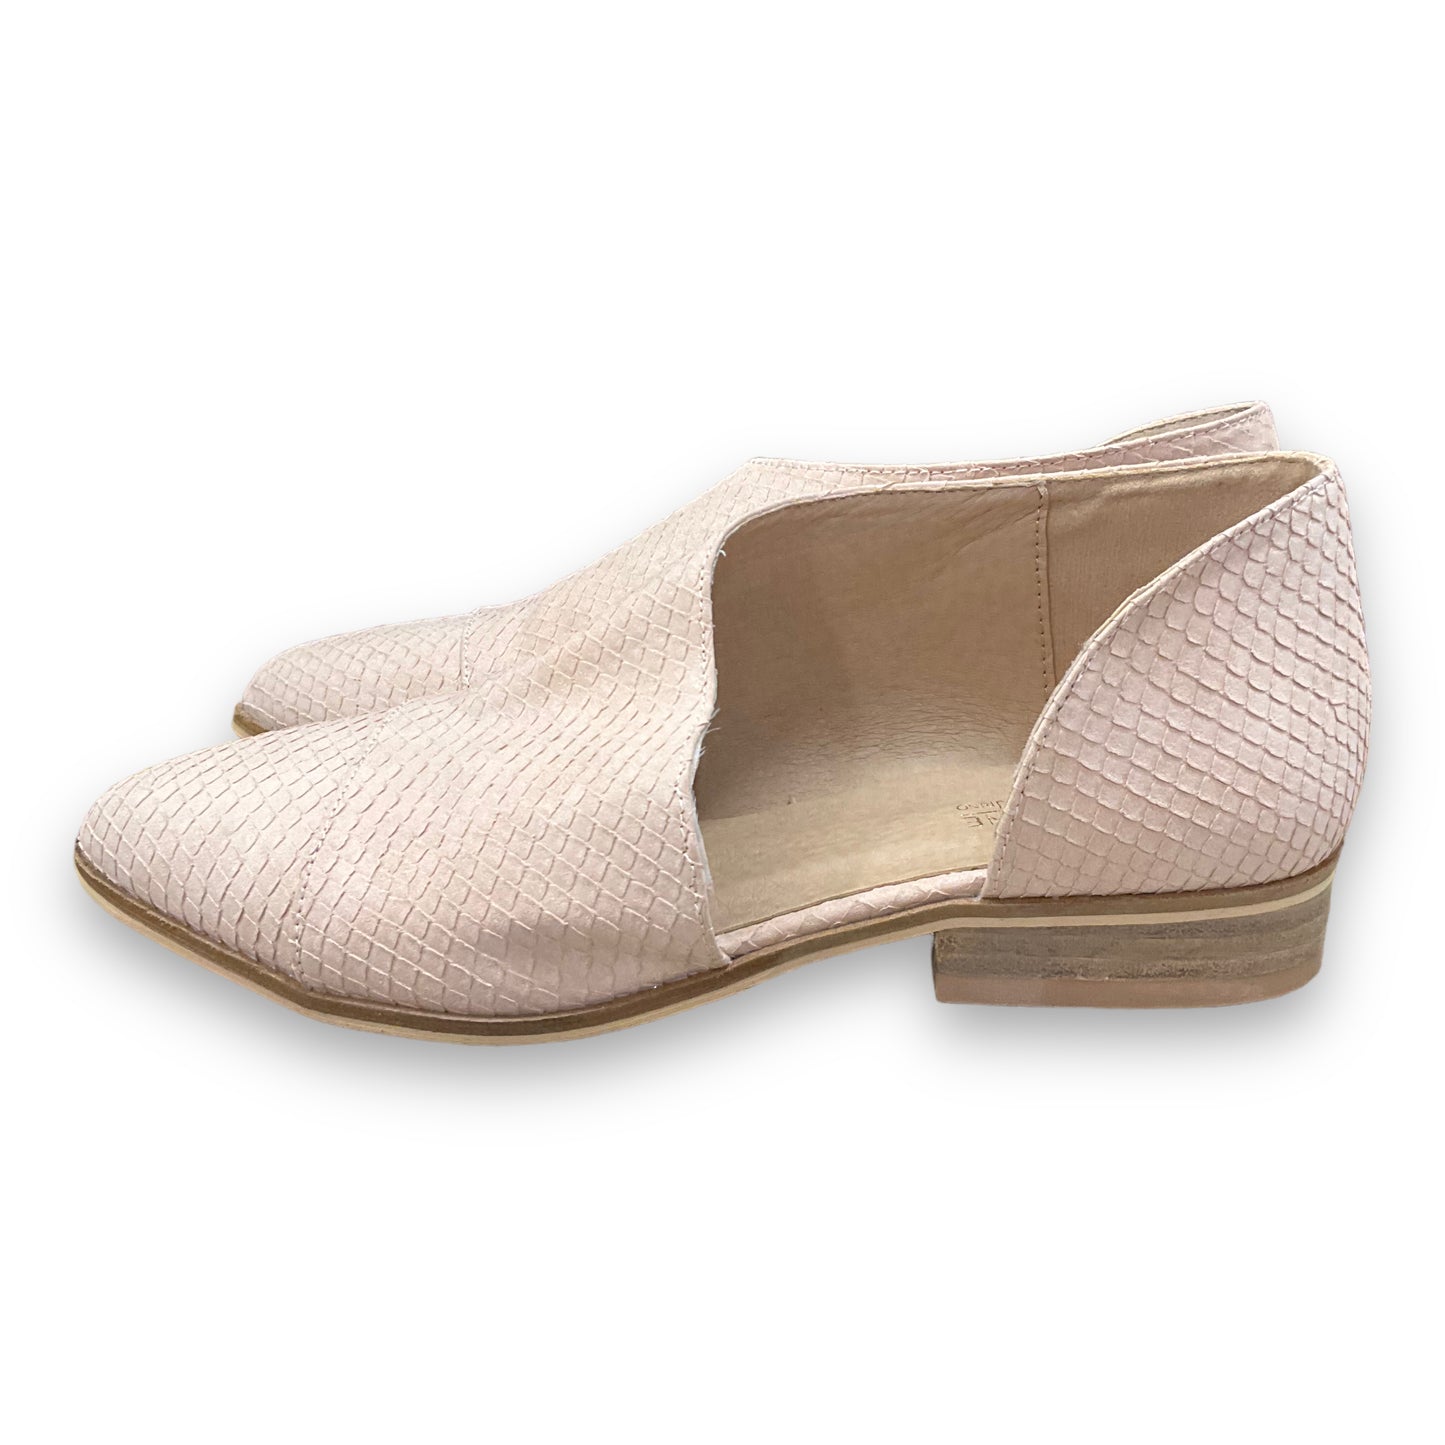 Shoes Flats Mule And Slide By Catherine Malandrino  Size: 6.5